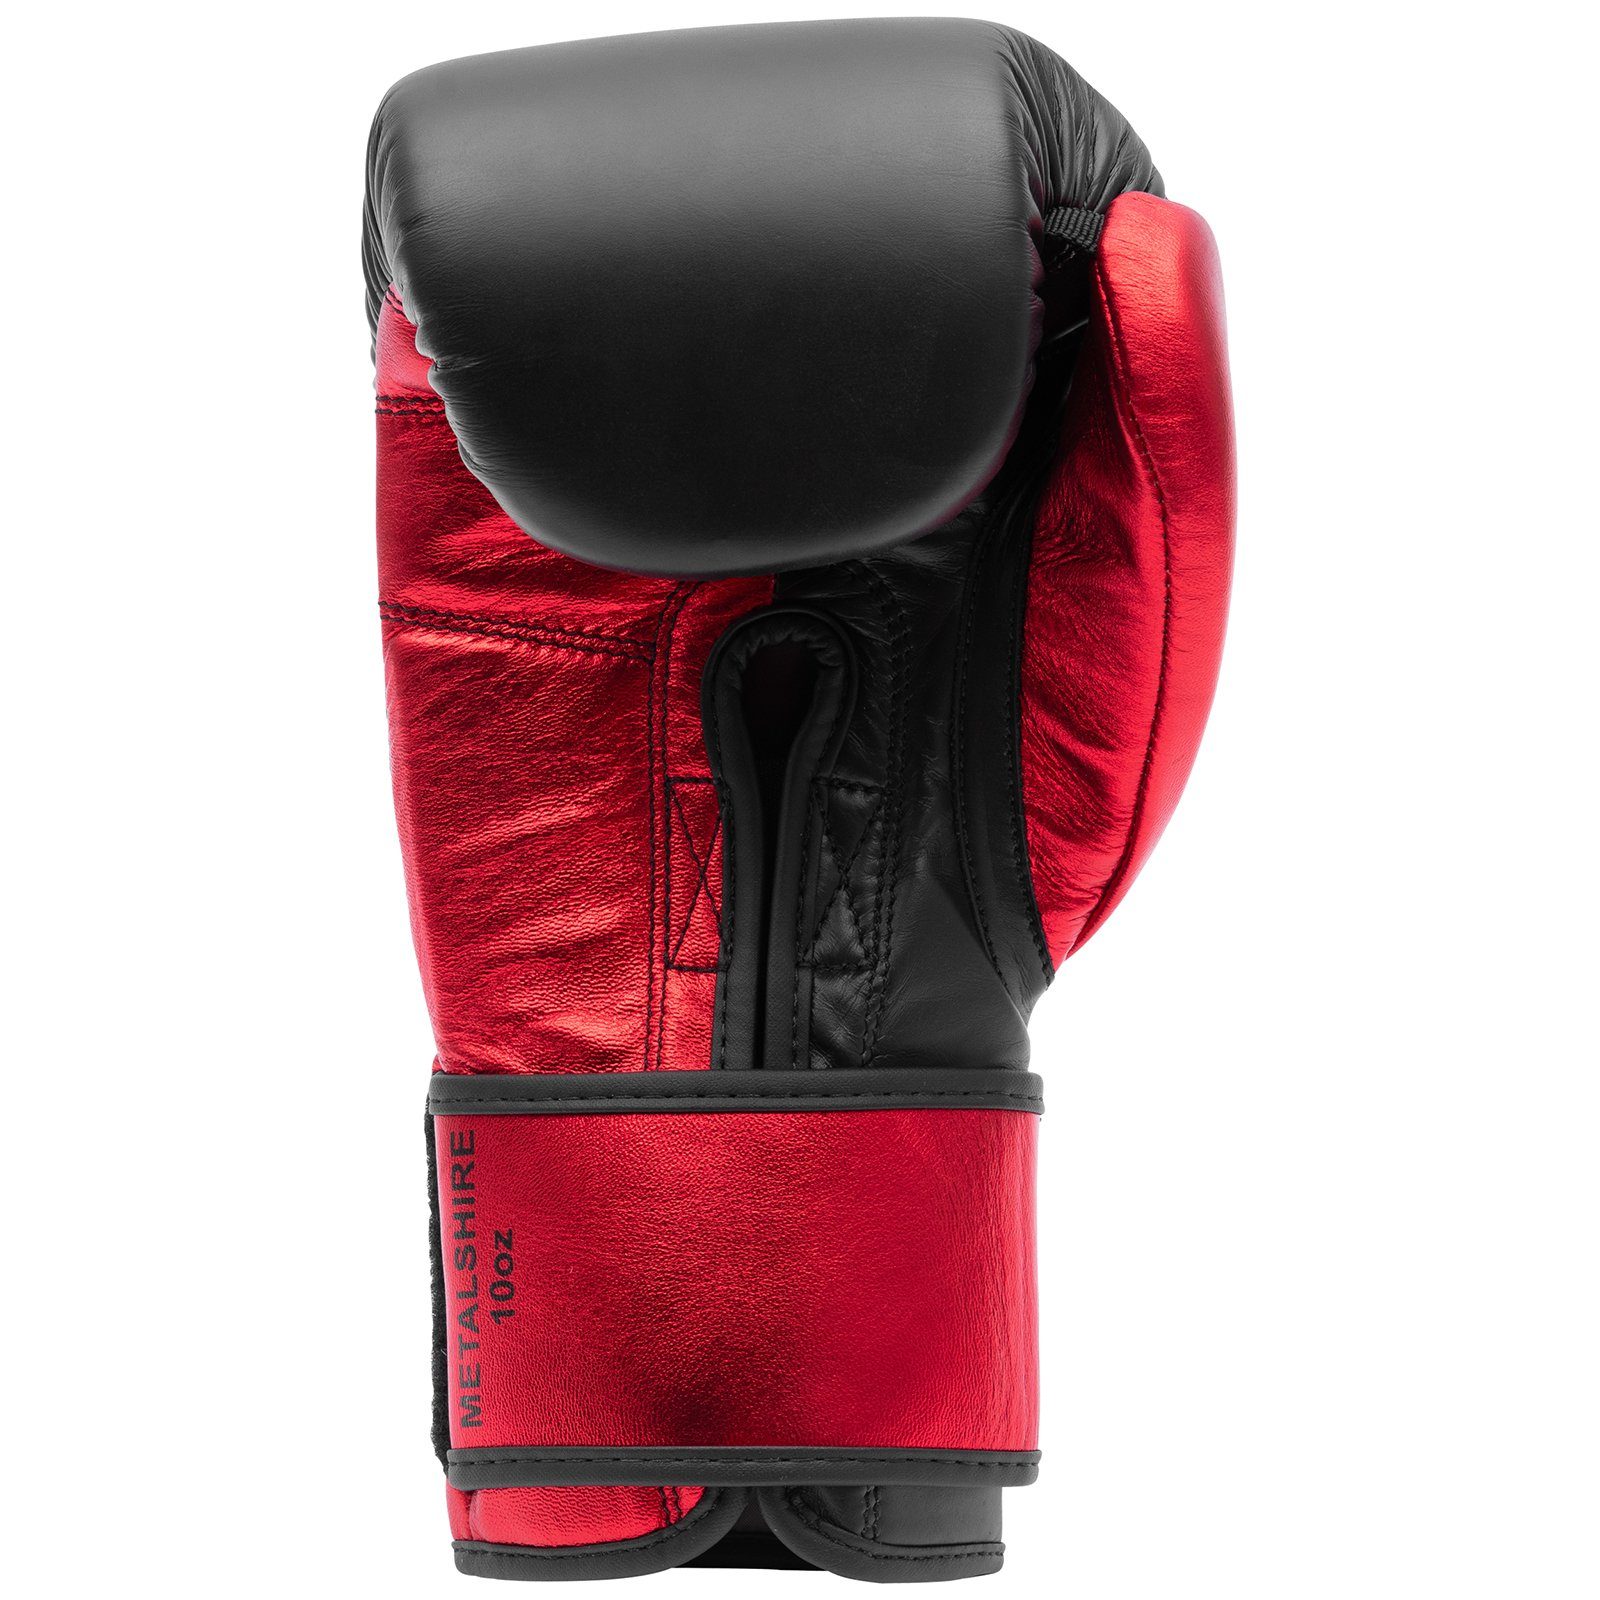 Black/Red Marciano Benlee Boxhandschuhe METALSHIRE Rocky